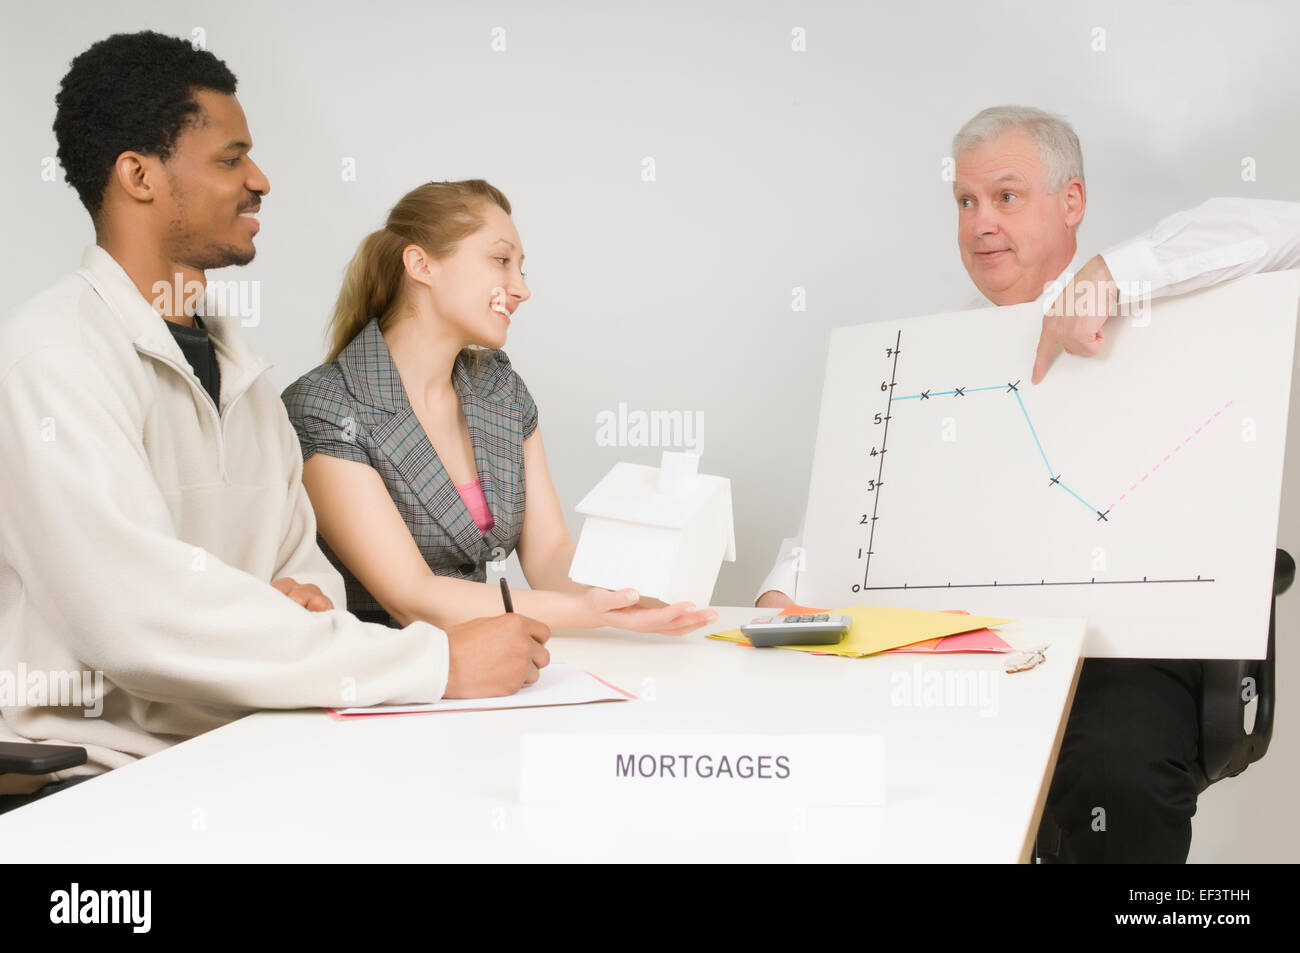 Mortgage broker sitting with clients Stock Photo